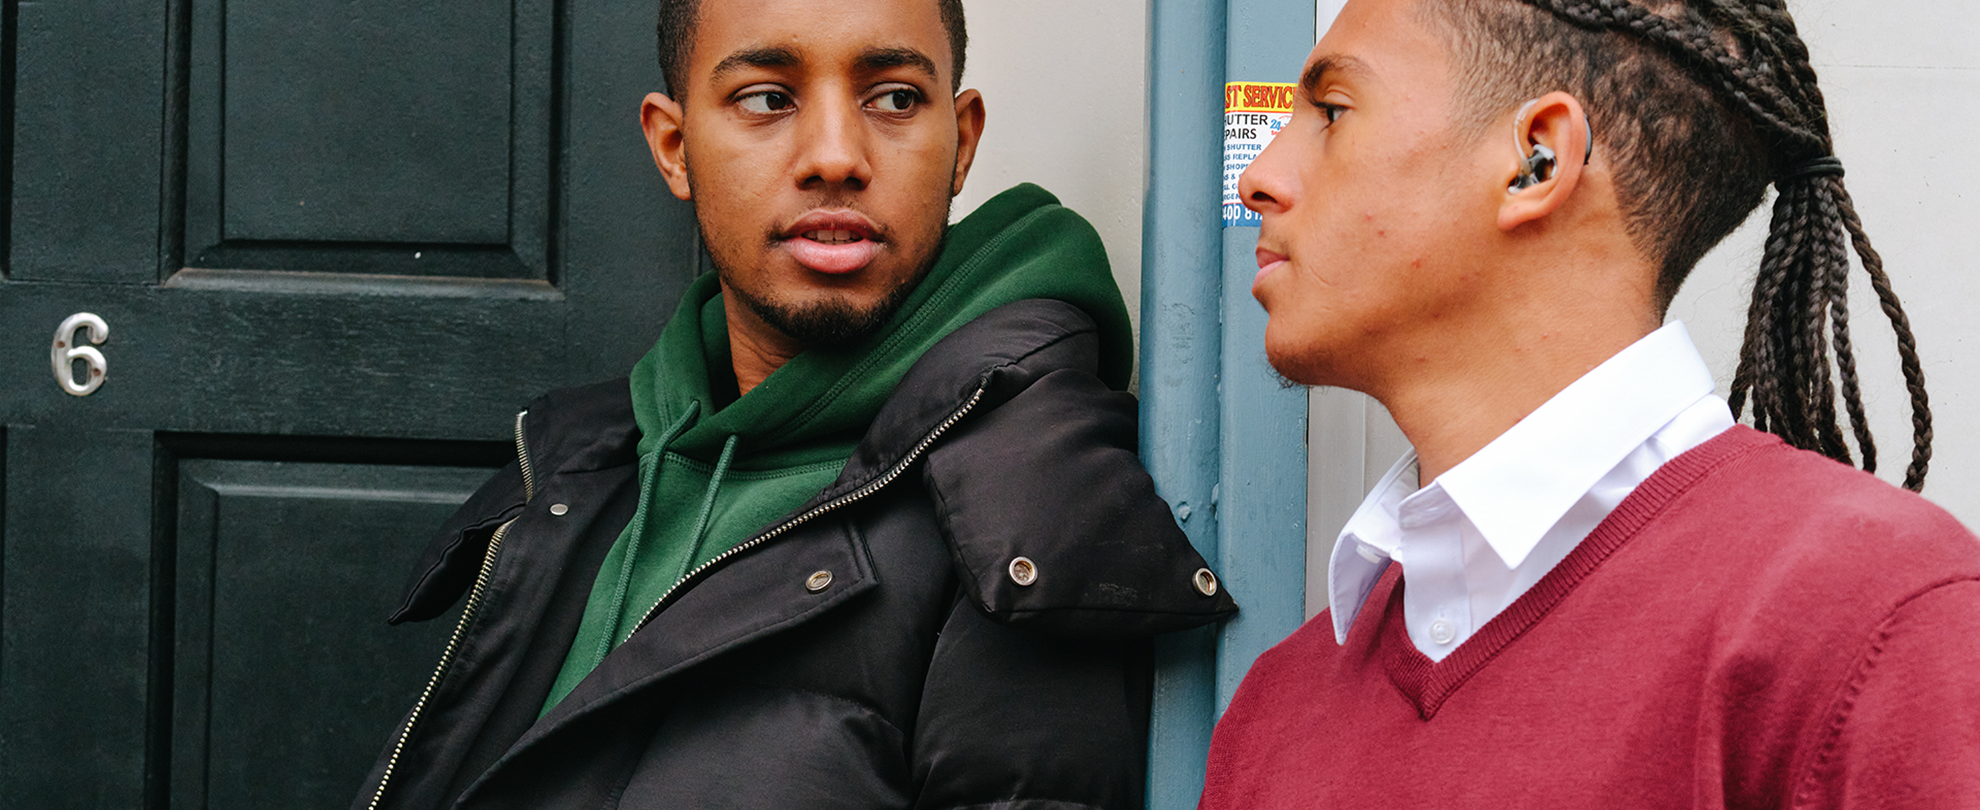 A young Black man standing outside a front door with a Black teenage boy wearing a hearing aid. They are talking together about something serious.